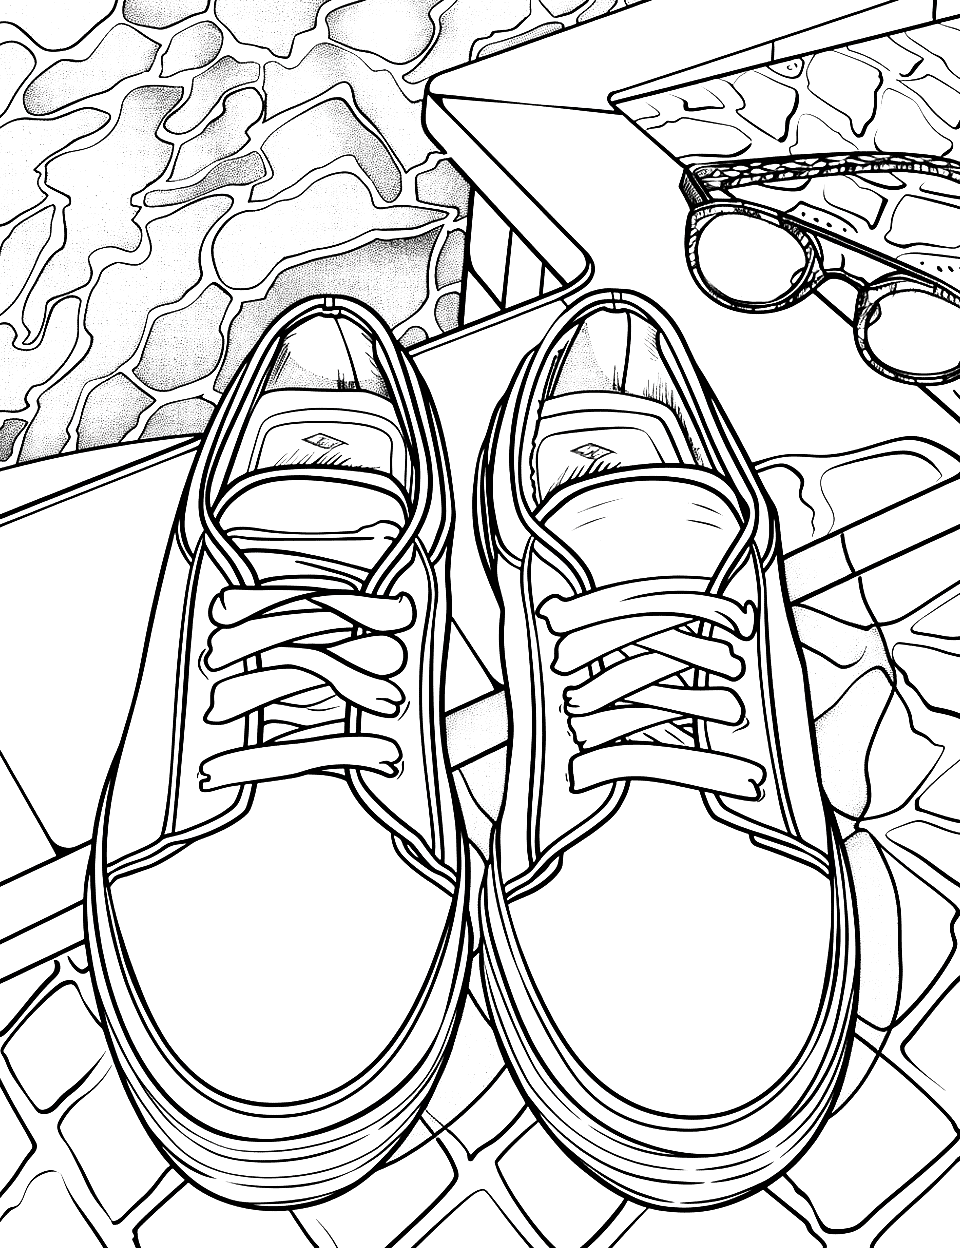 Shoes at the Pool Shoe Coloring Page - Shoes beside a pool with goggles on the deck.